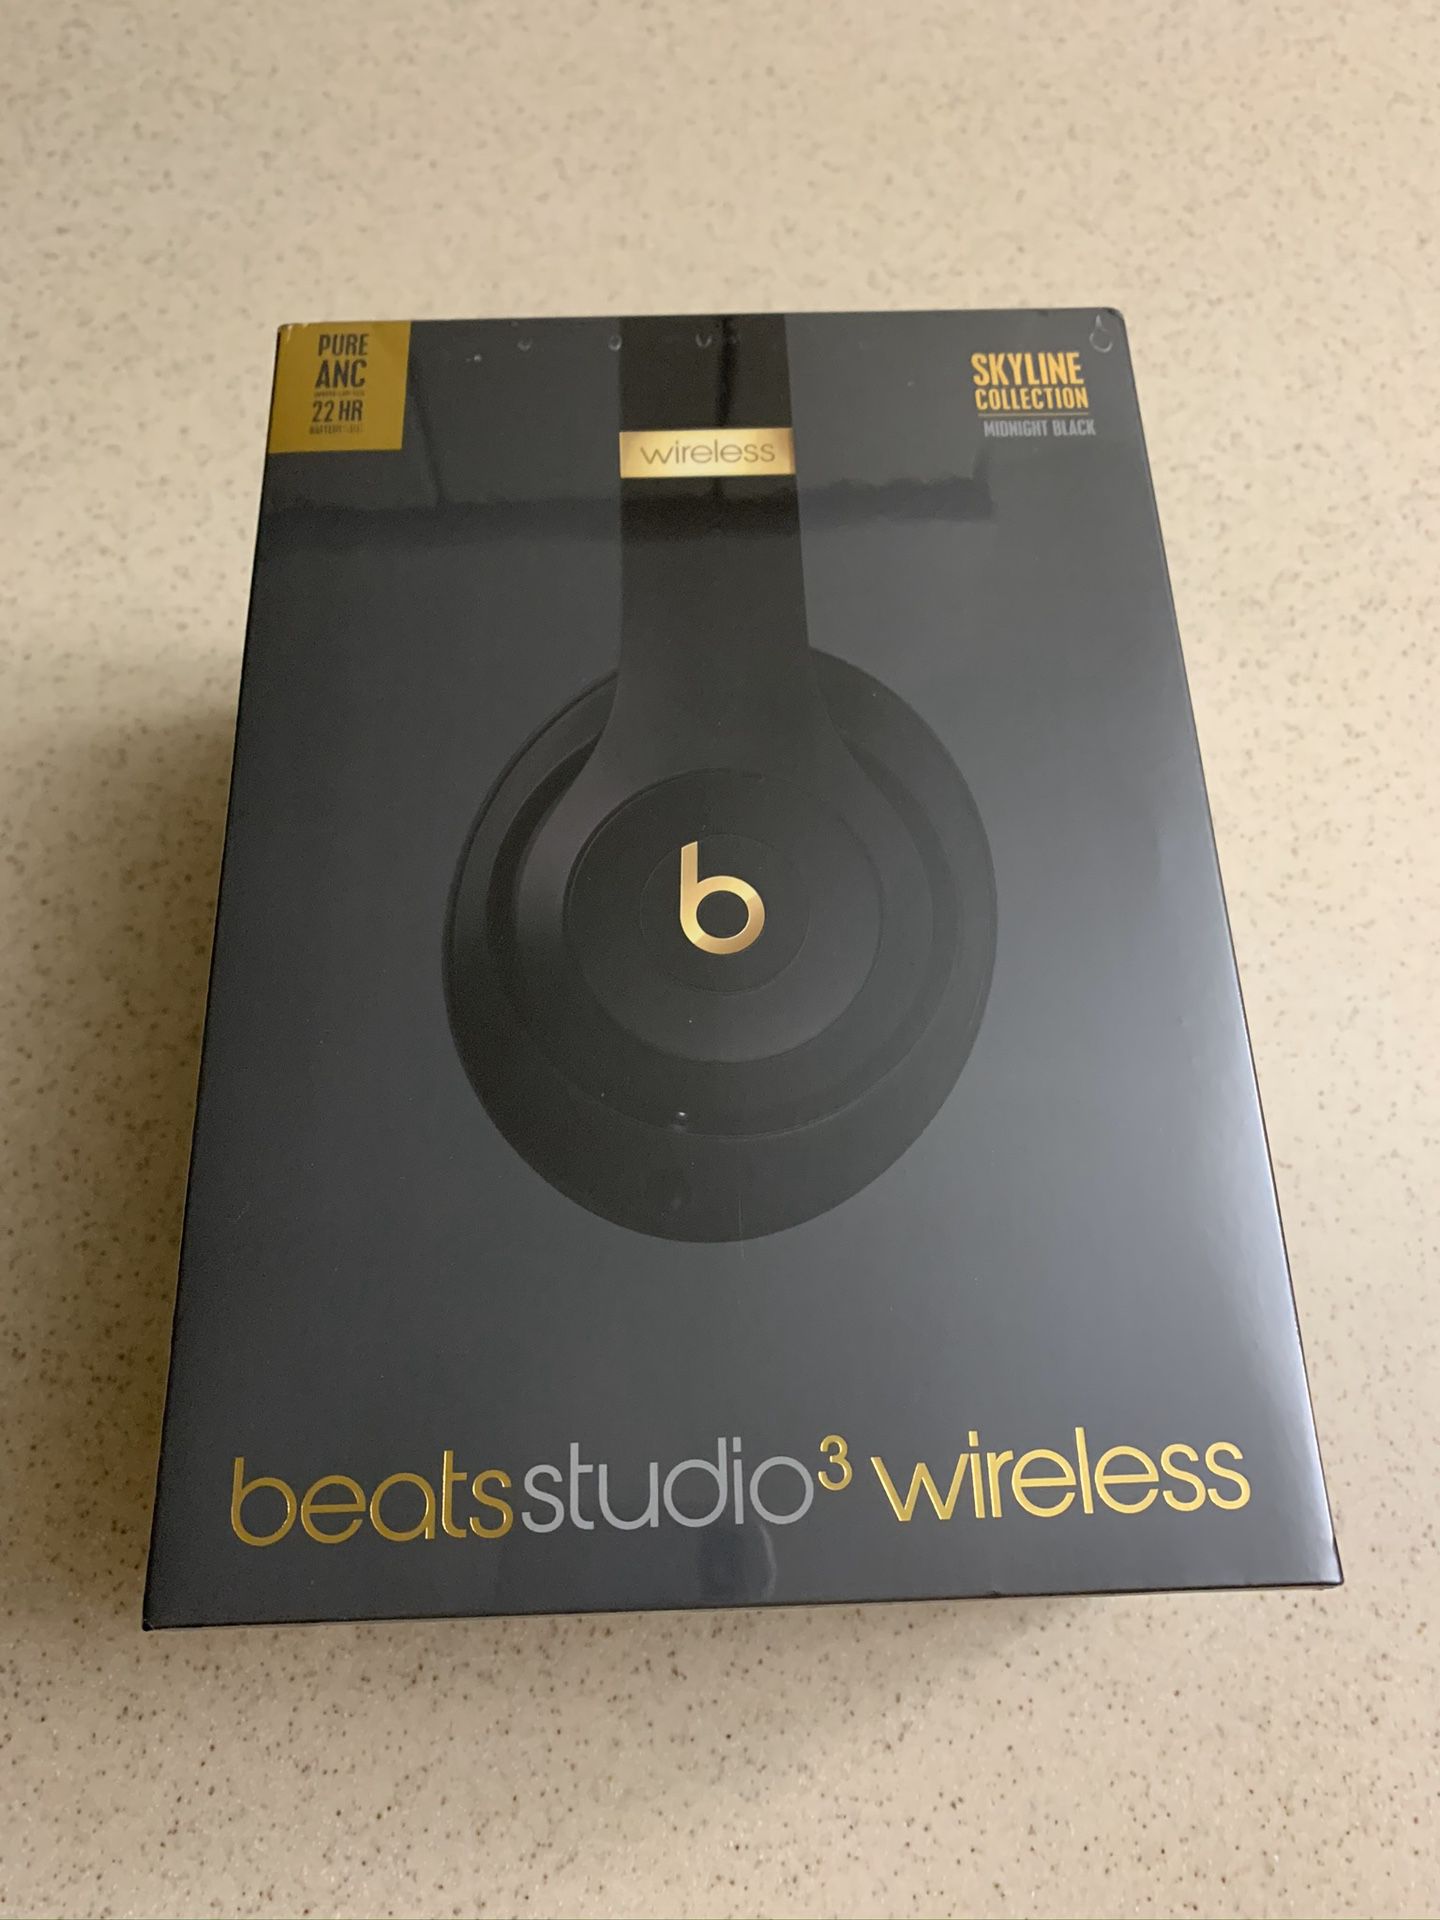 Beats by Dr. Dre Studio3 Wireless Headphones - Skyline Collection Midnight Black NEW SEALED